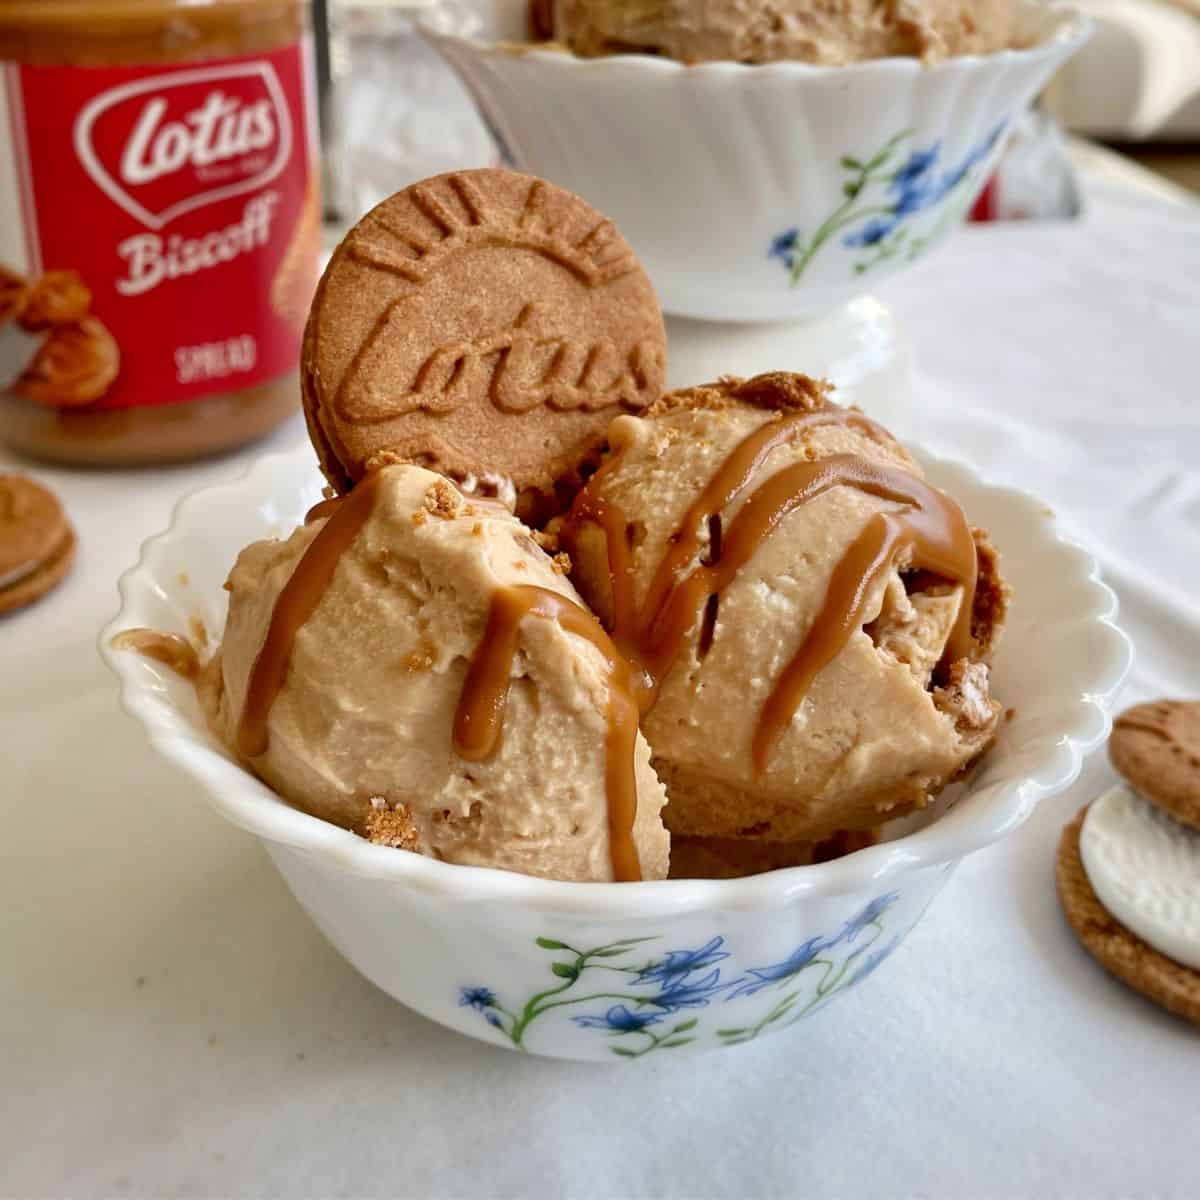 Lotus Biscoff Ice Cream Recipe - The Cooking Foodie